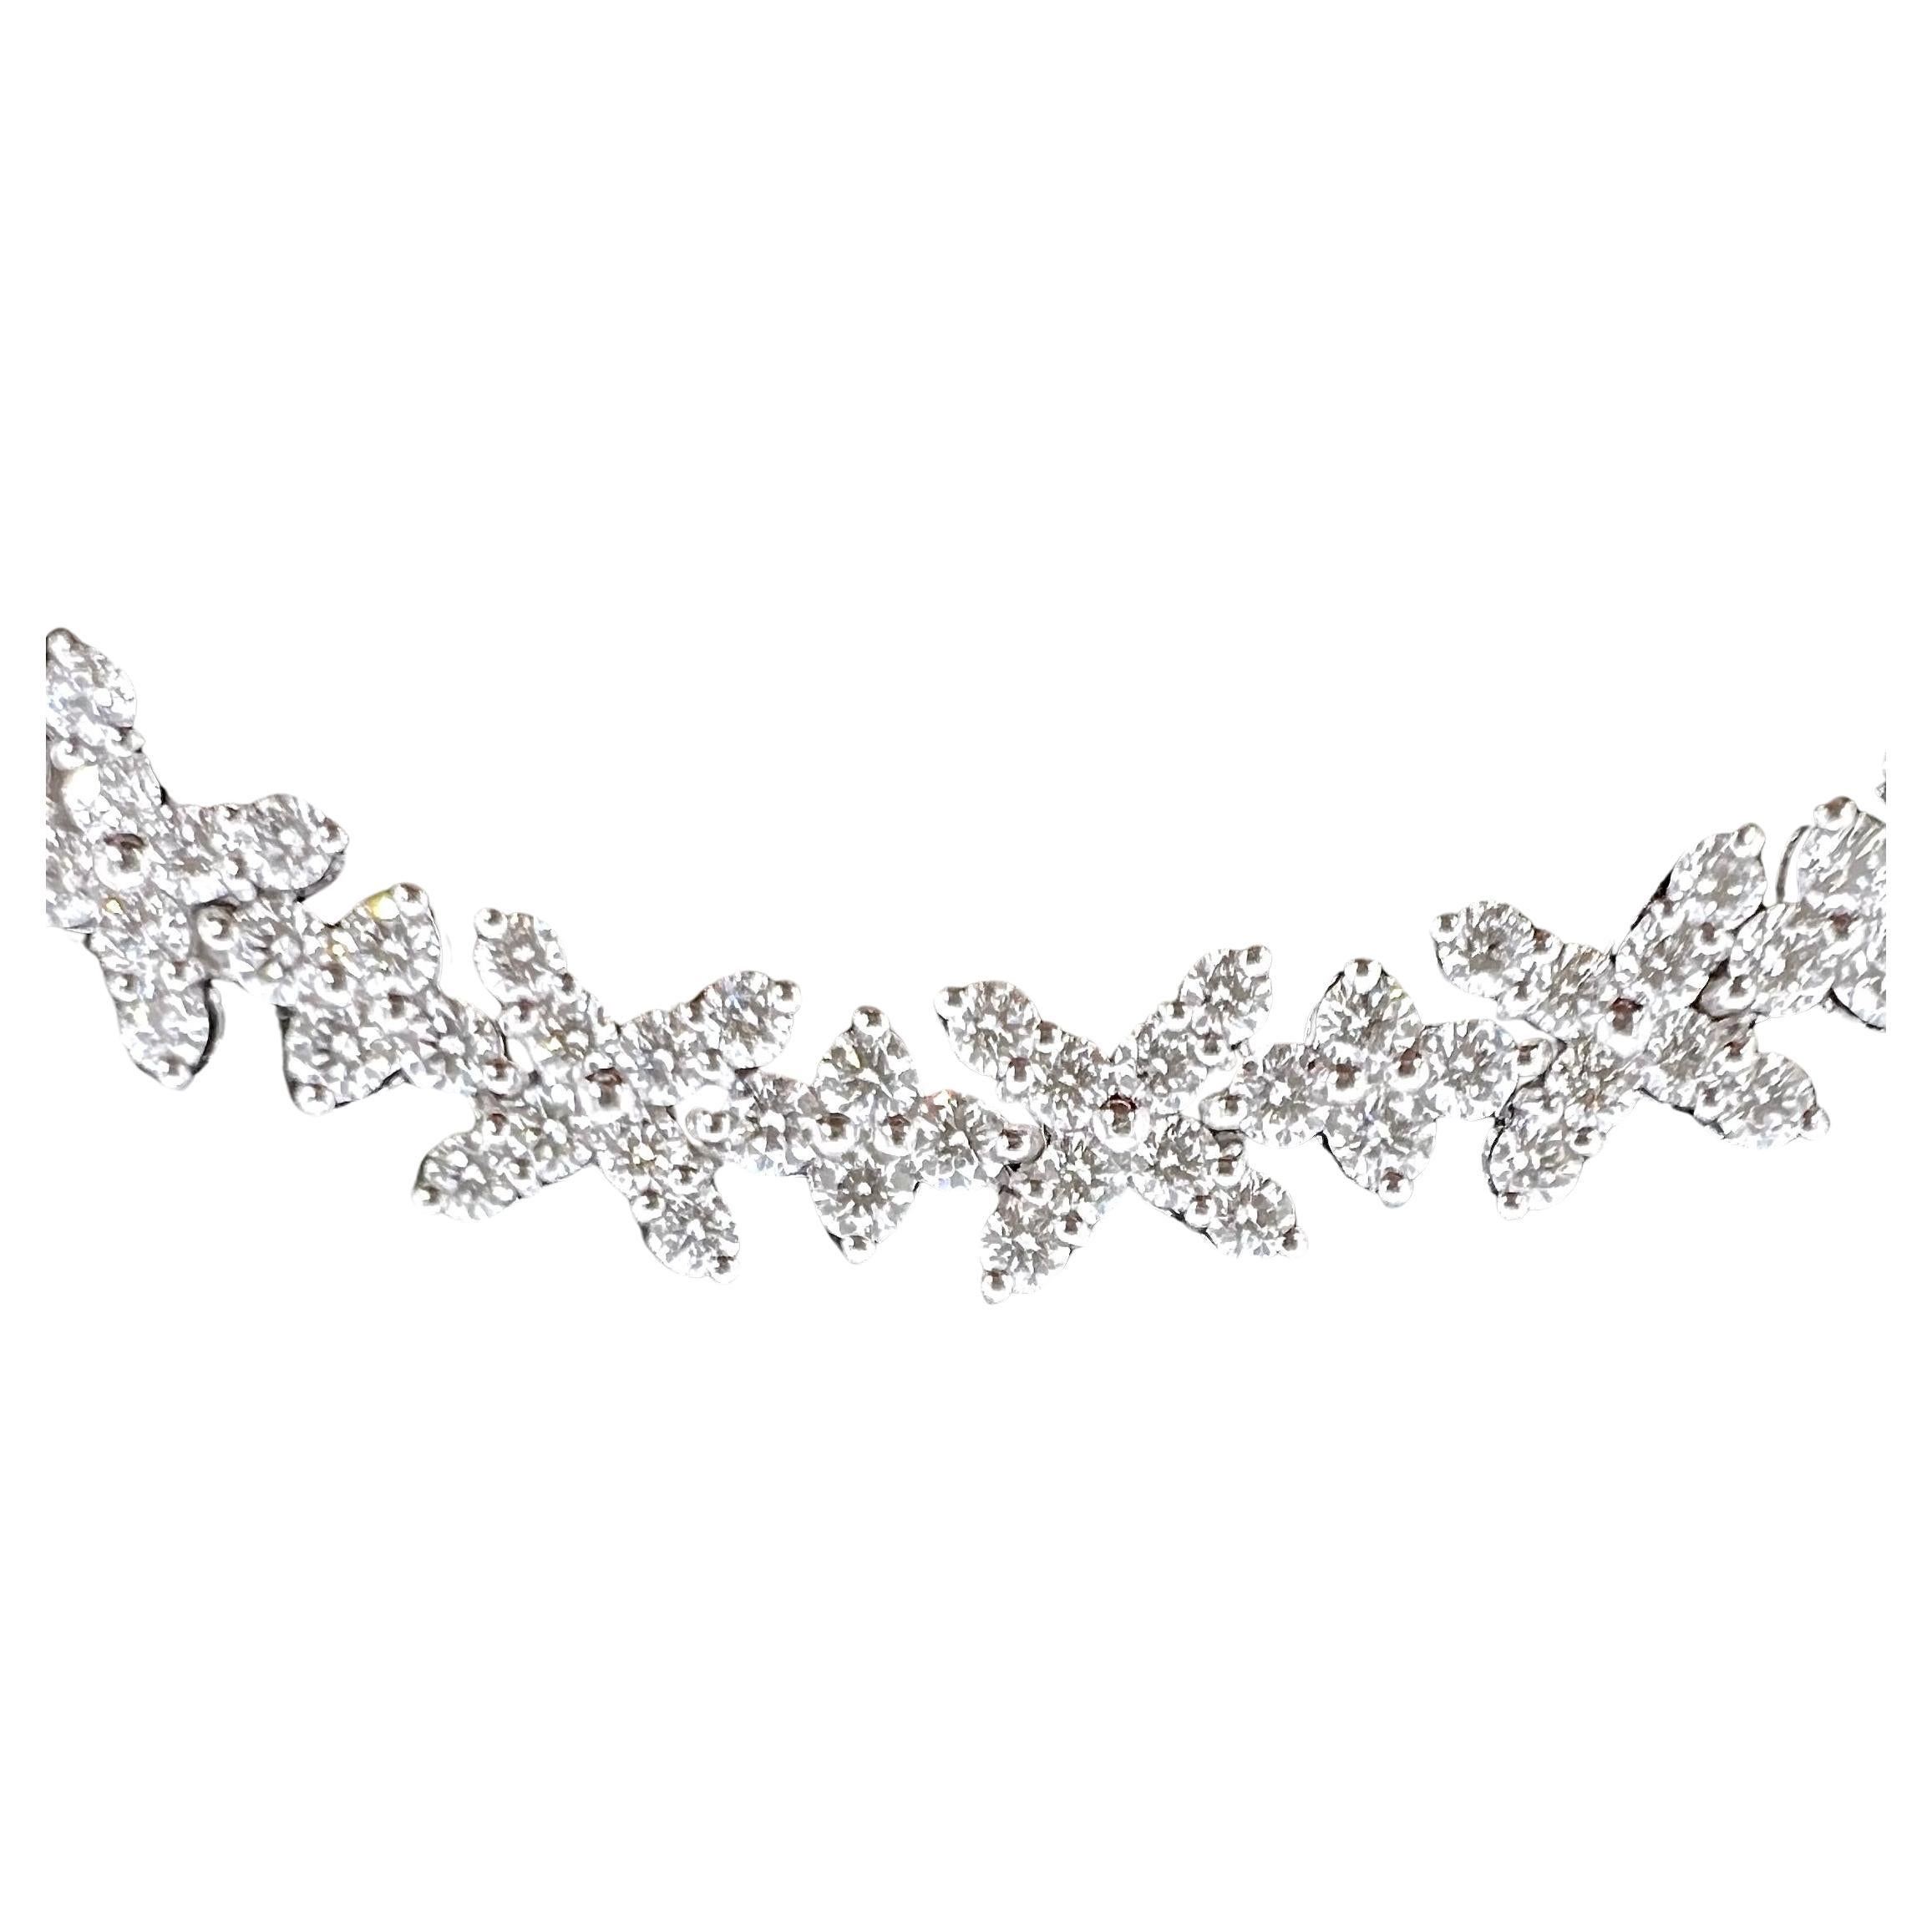 Perfect for the holiday's or luncheons, this diamond necklace is absolutely a must! It is not your typical, long diamond tennis necklace that everyone else has! This graduated diamond necklace is made up of X & O's pattern that gives a more